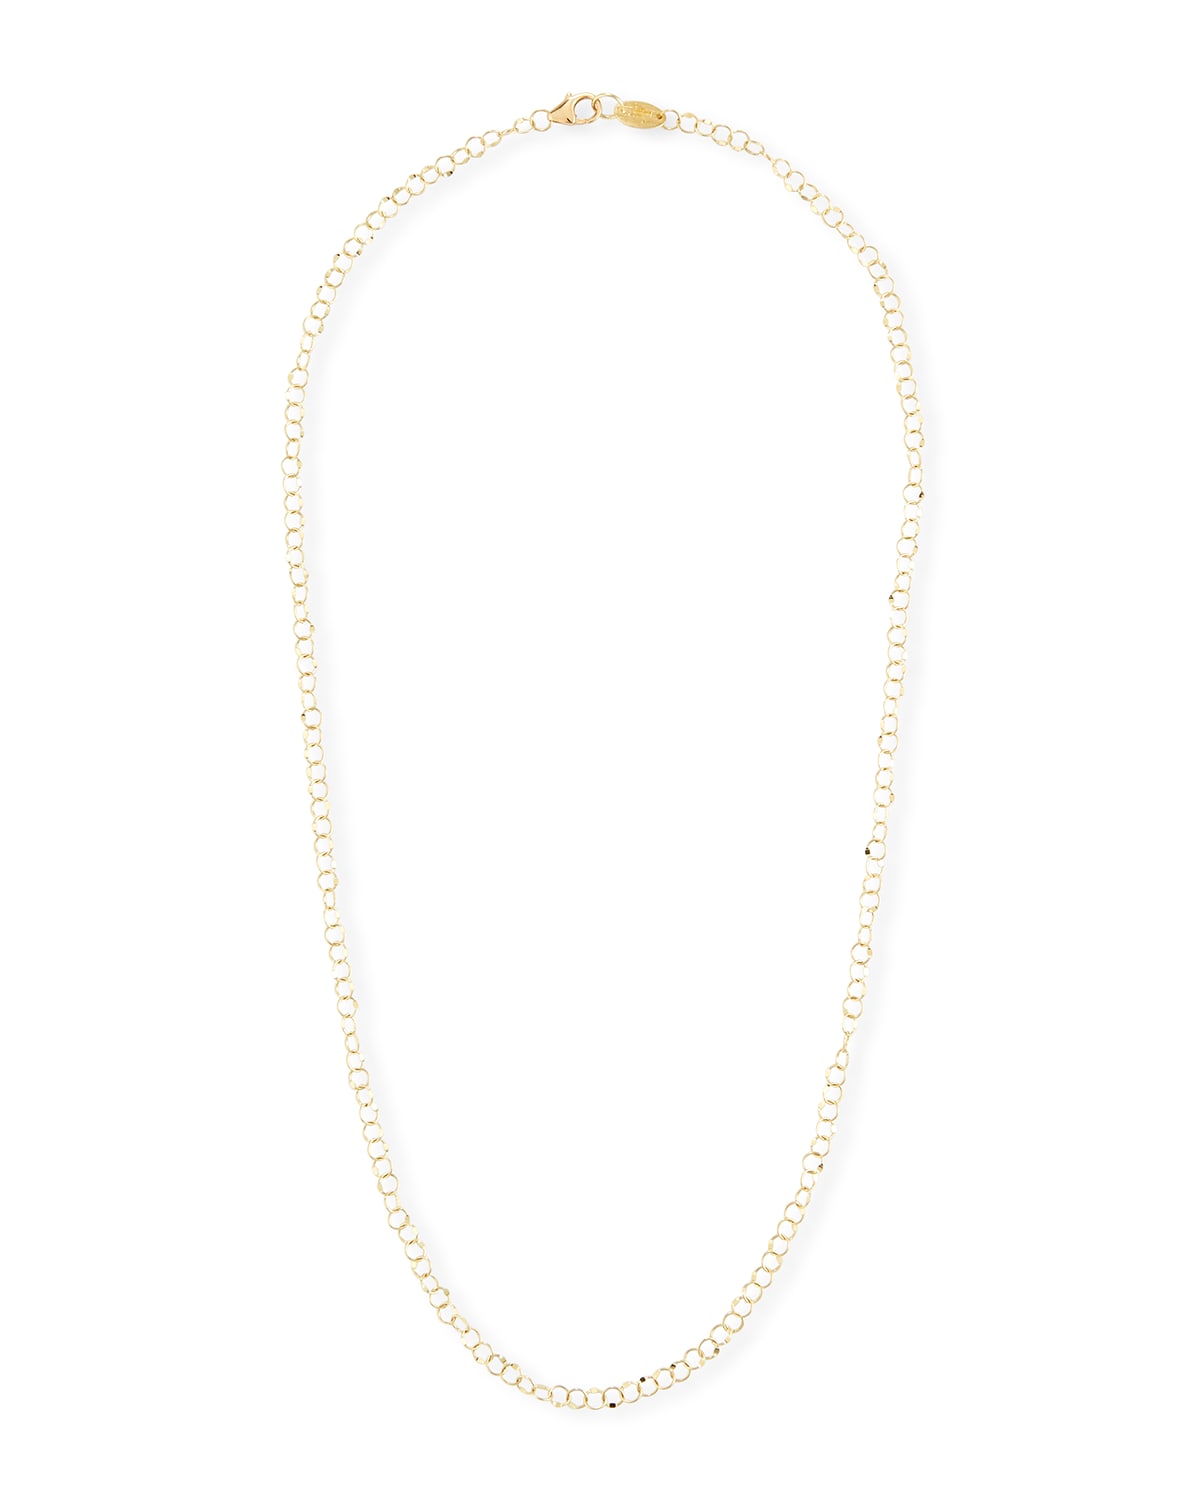 Jude Frances 18k Gold Hammered Circle Chain Necklace, 18"L